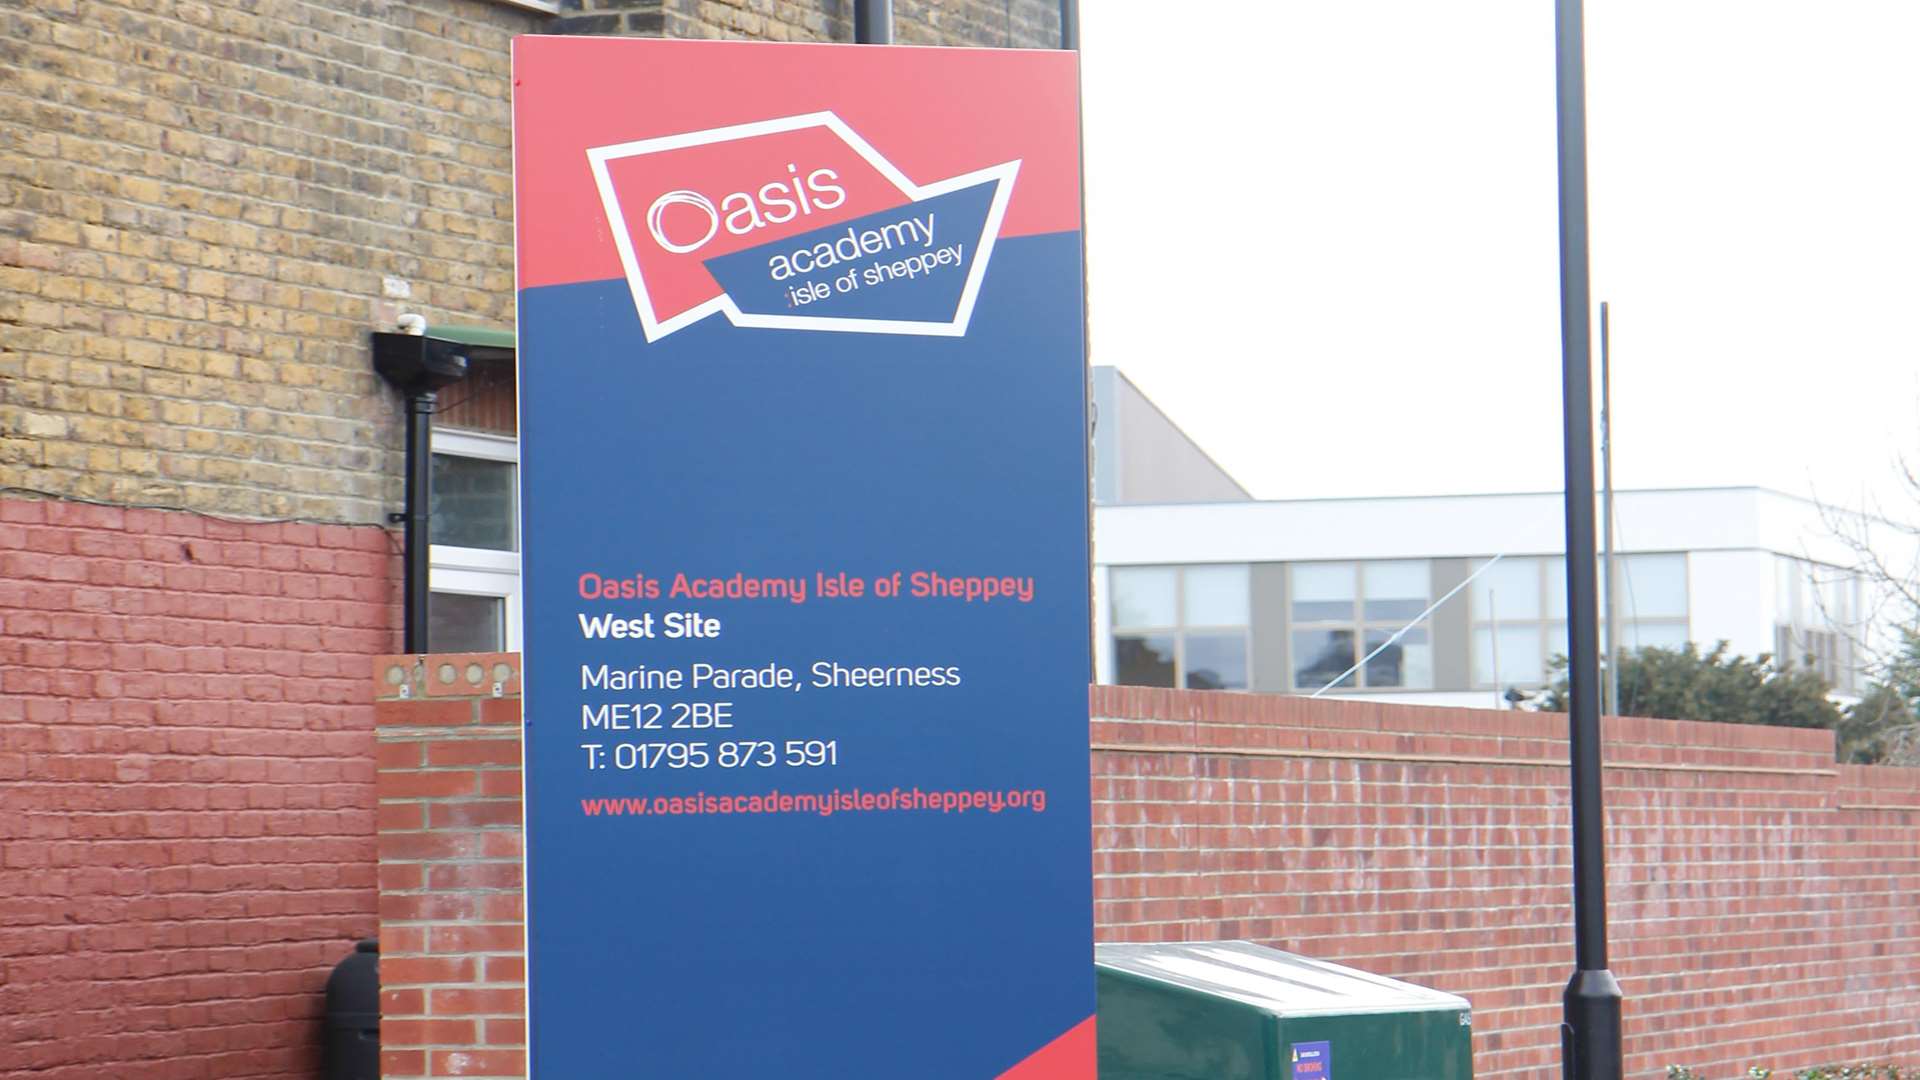 The Oasis Academy's West site is located in Marine Parade, Sheerness.